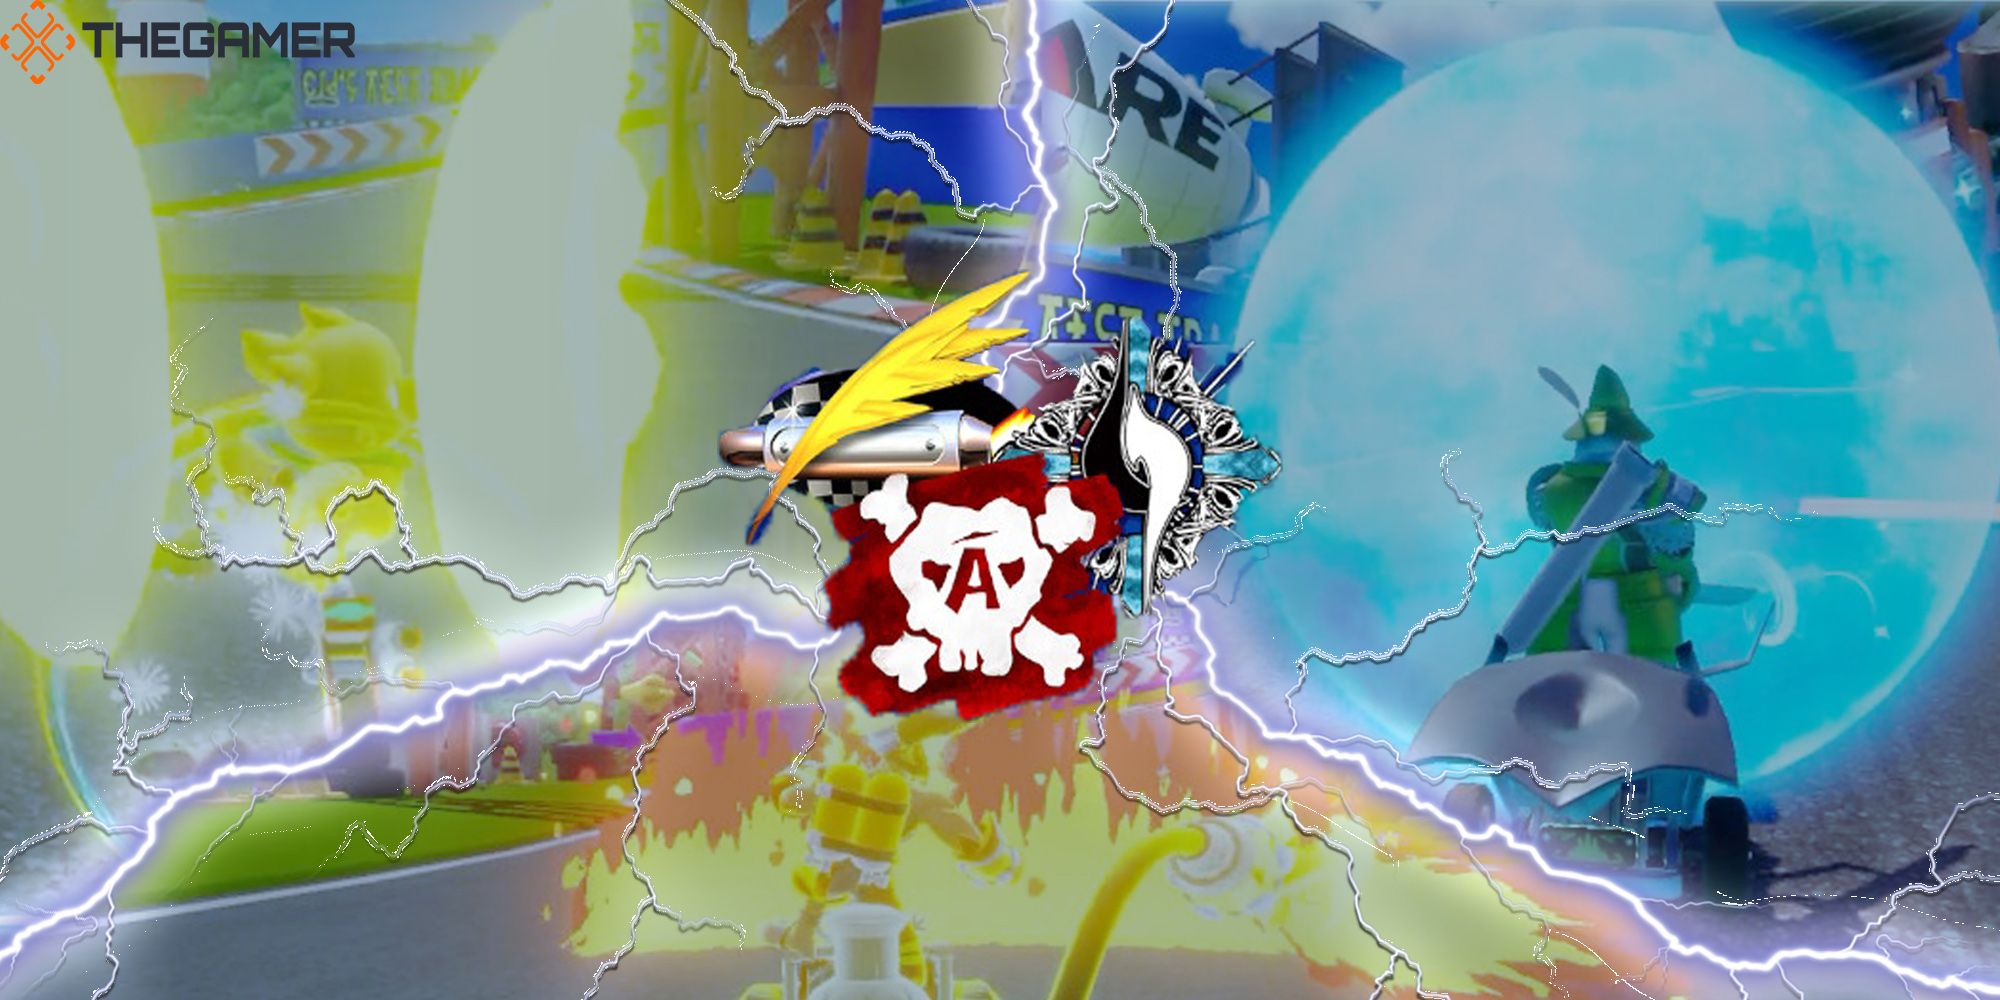 Three images divided by lightning bolts, featuring Chocobo, Ifrit, and Steiner racing on Cid's Test Track. The three team logos sit in the center of the image. Custom Image for TheGamer. Chocobo GP.